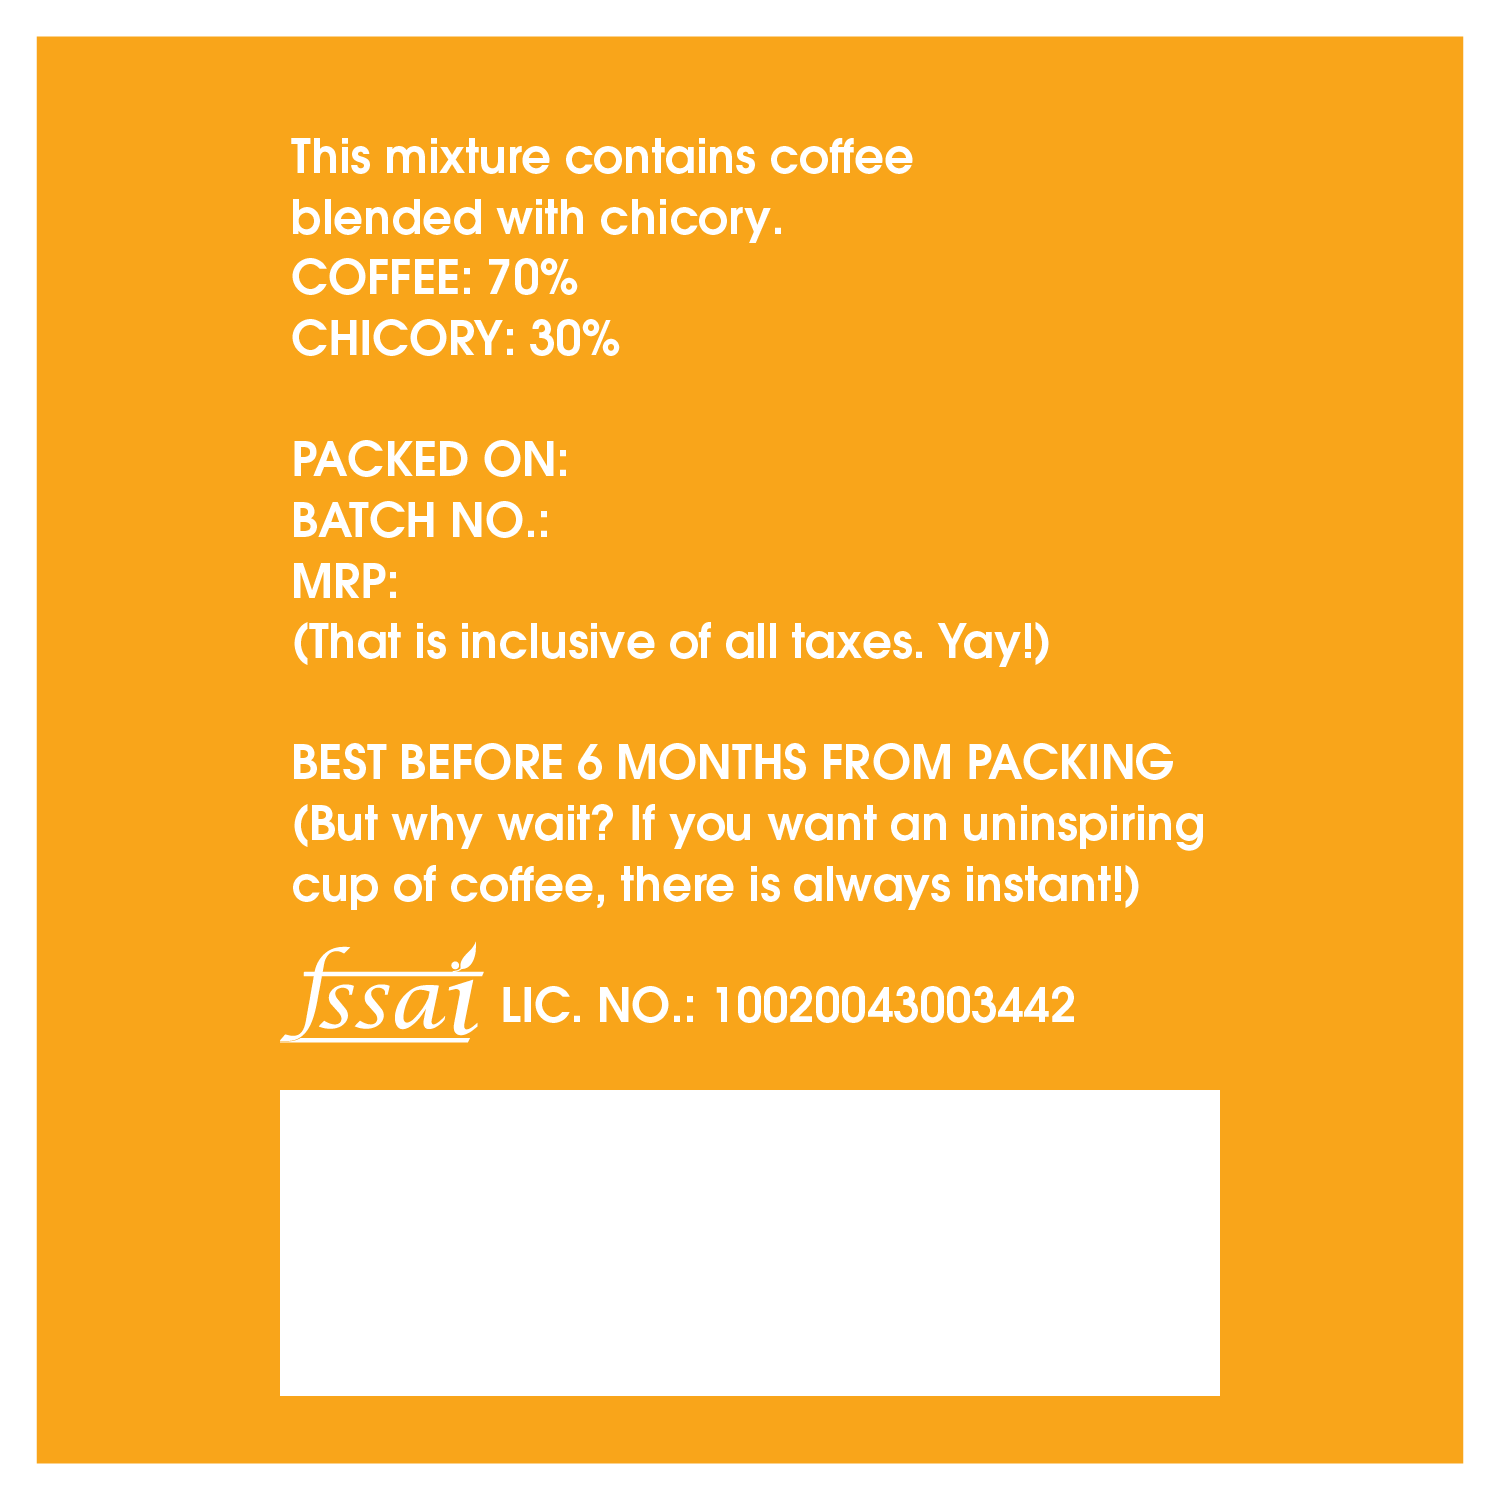 South Indian Filter Coffee with Chicory (250 g) Pack of 2 with Free Assorted Coffee Drip Bags of 6 Easy Pour (6X20g) Coffee Blends